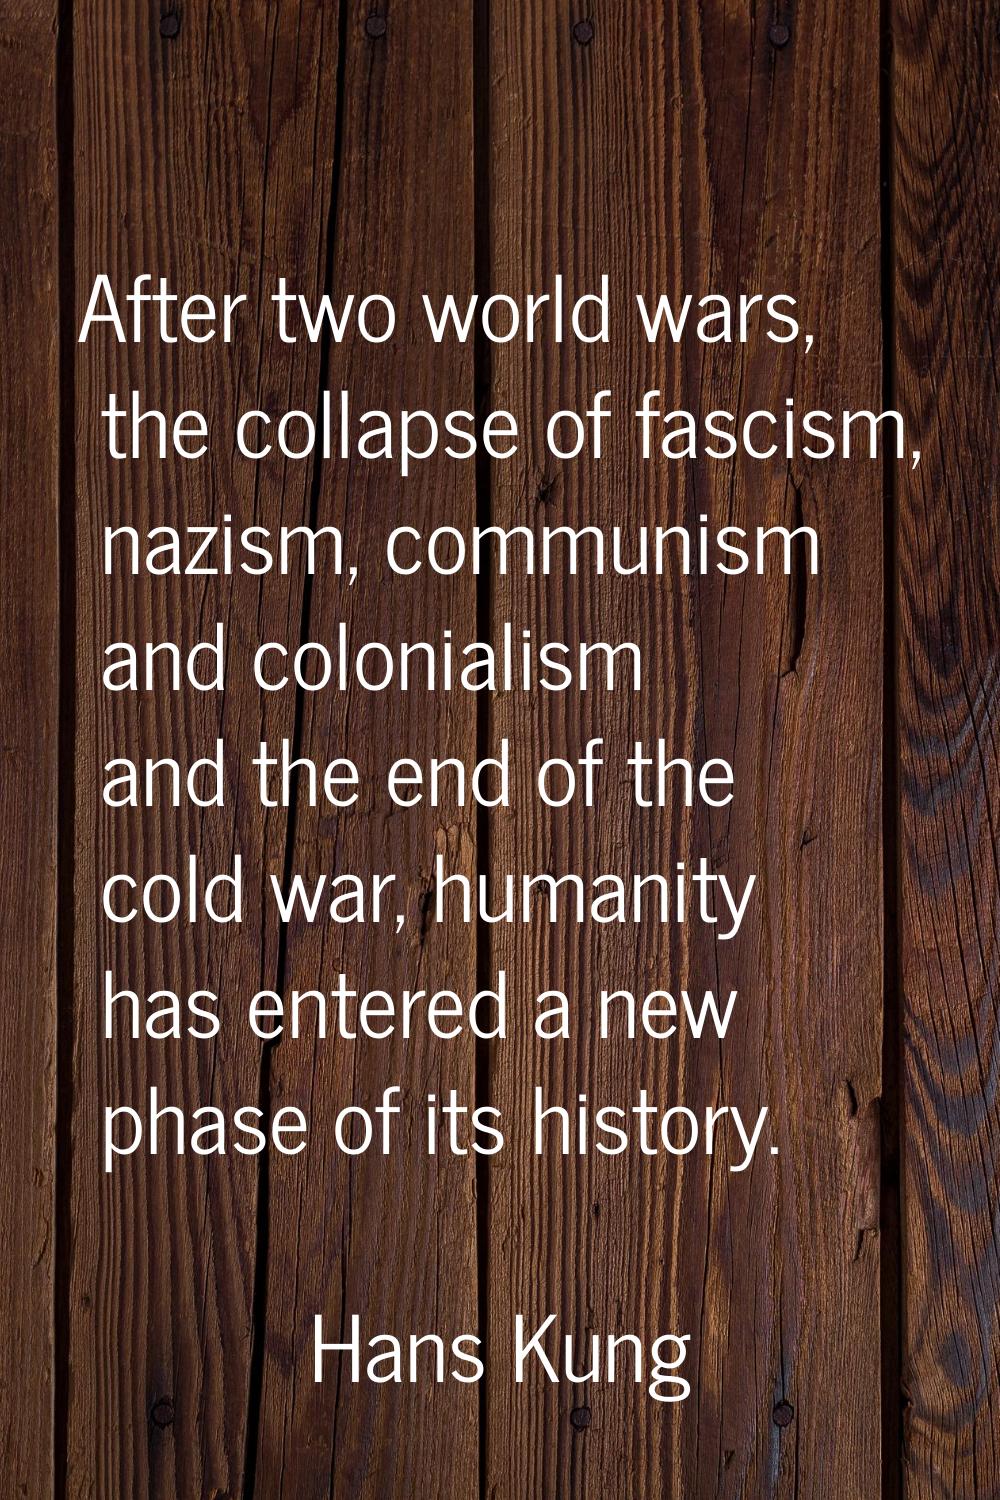 After two world wars, the collapse of fascism, nazism, communism and colonialism and the end of the